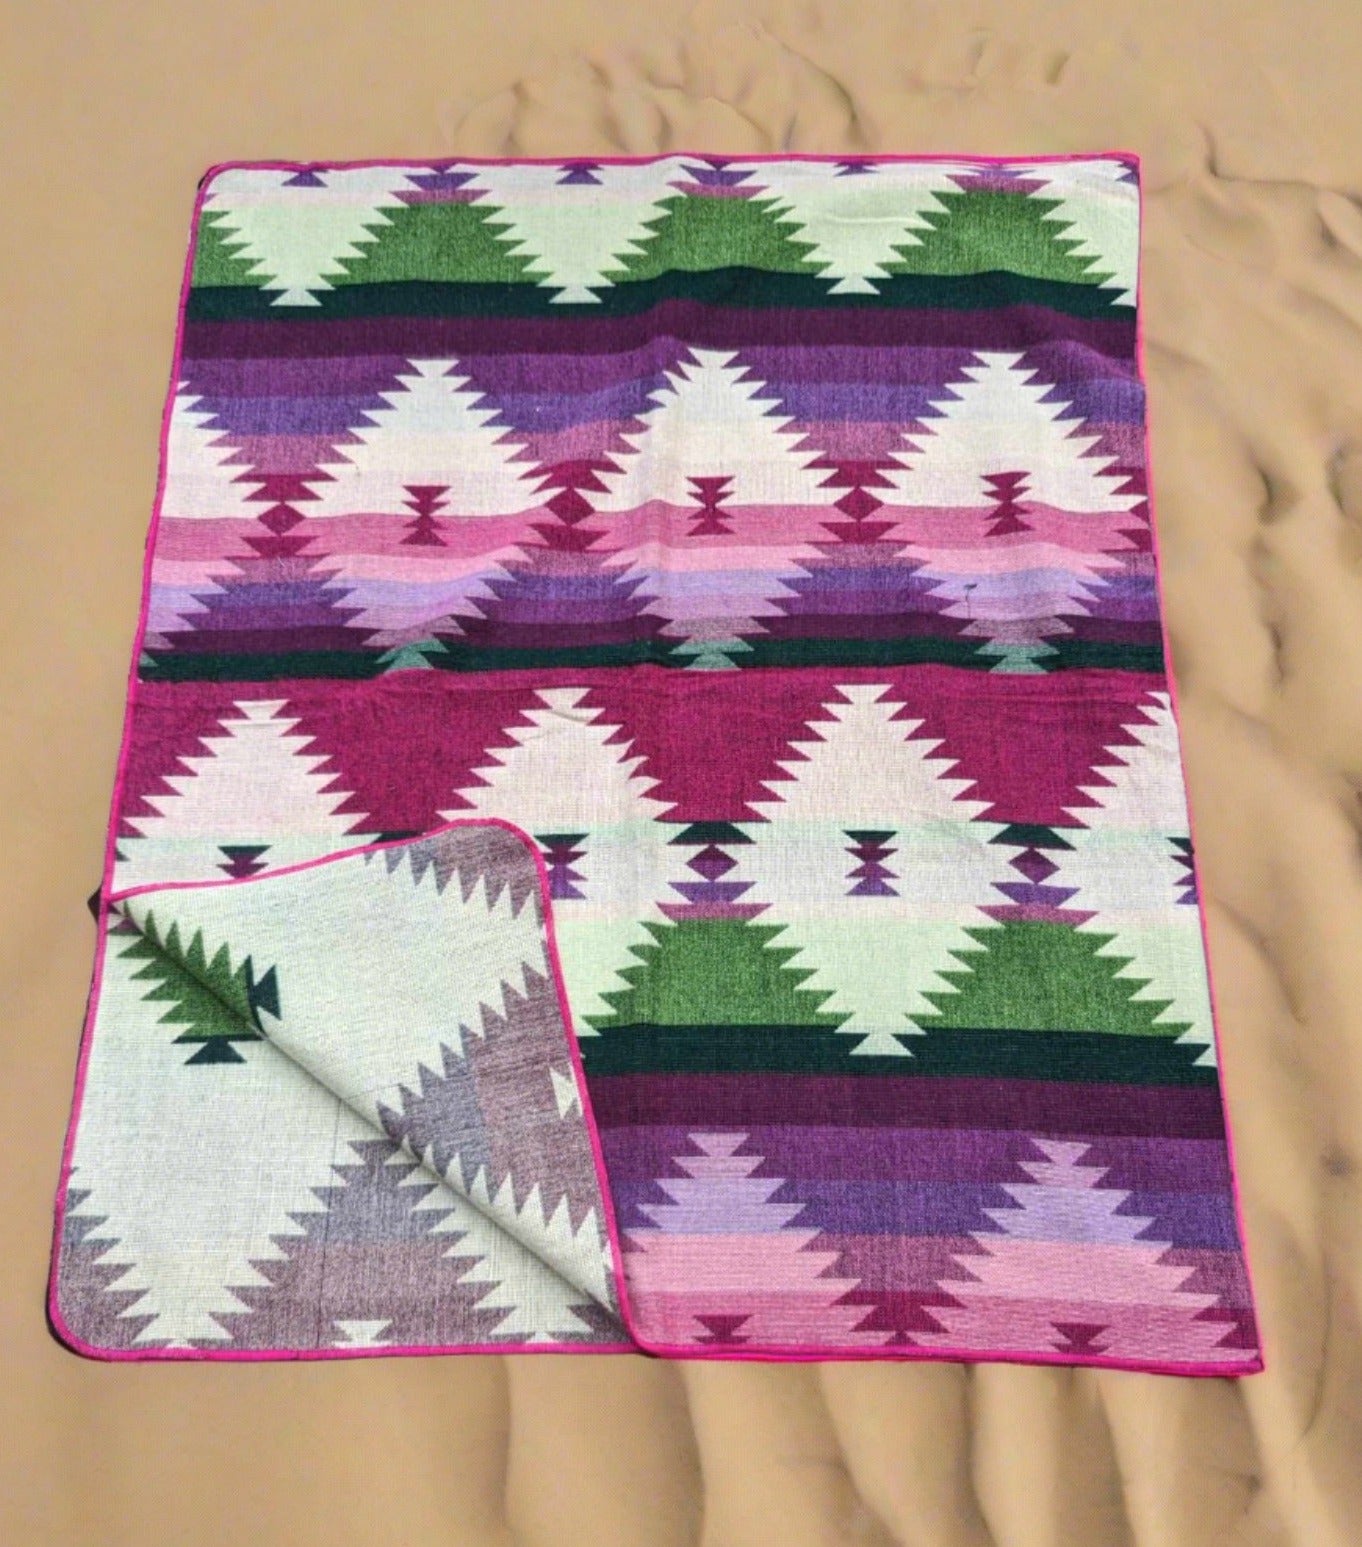 boho blanket colorful les Saisons. tones of pink, purple, green, dark green, white,, camping blanket, warm, soft, acrylic, made in Ecuador, Large, picnic, vanlife, unique designs, reversible